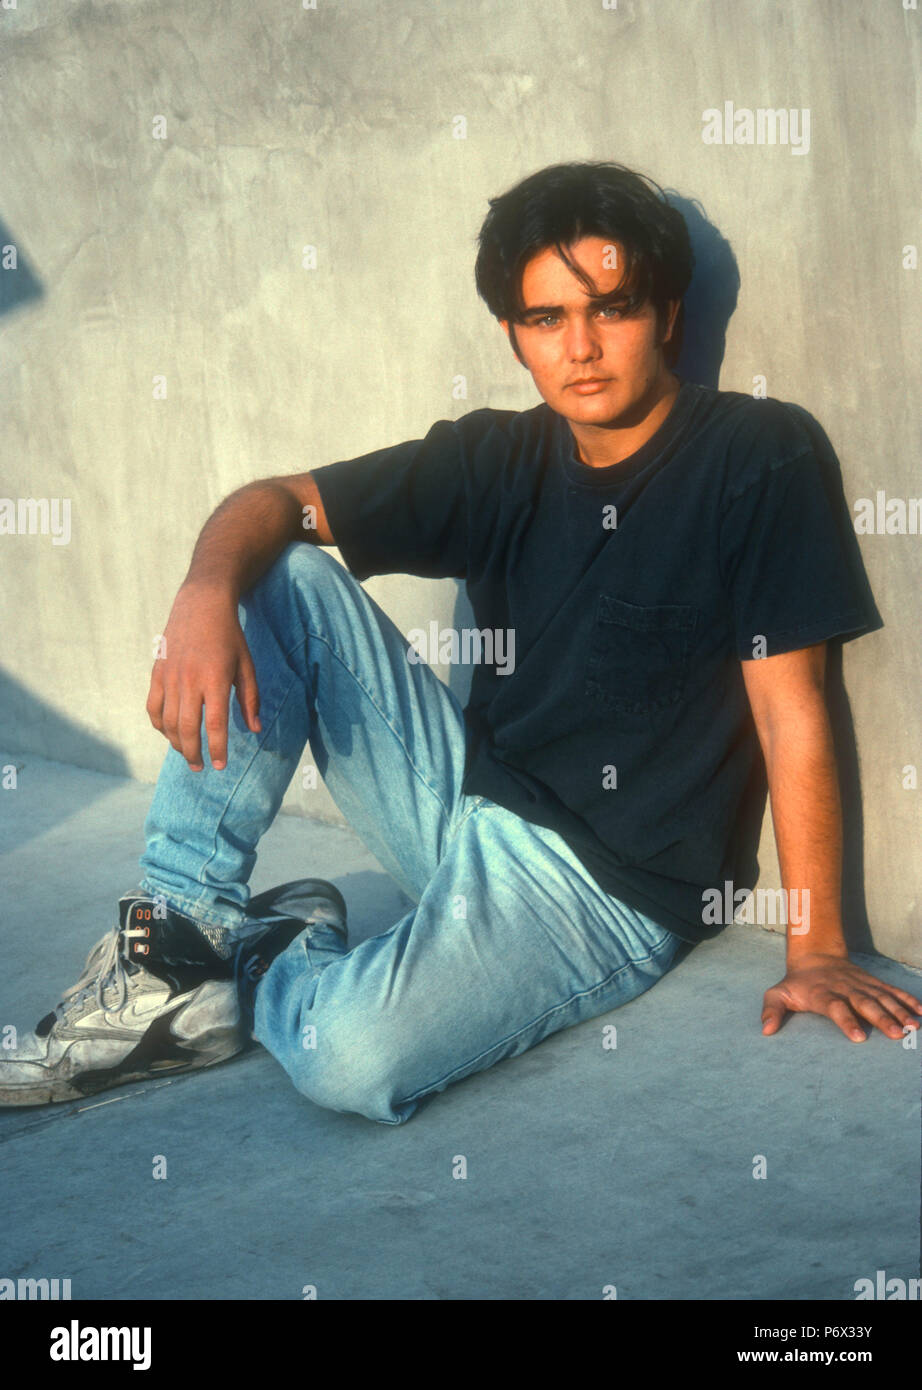 los angeles ca january 14 exclusive actor david mendenhall poses at a photo shoot on january 14 1992 in los angeles california photo by barry kingalamy stock photo P6X33Y